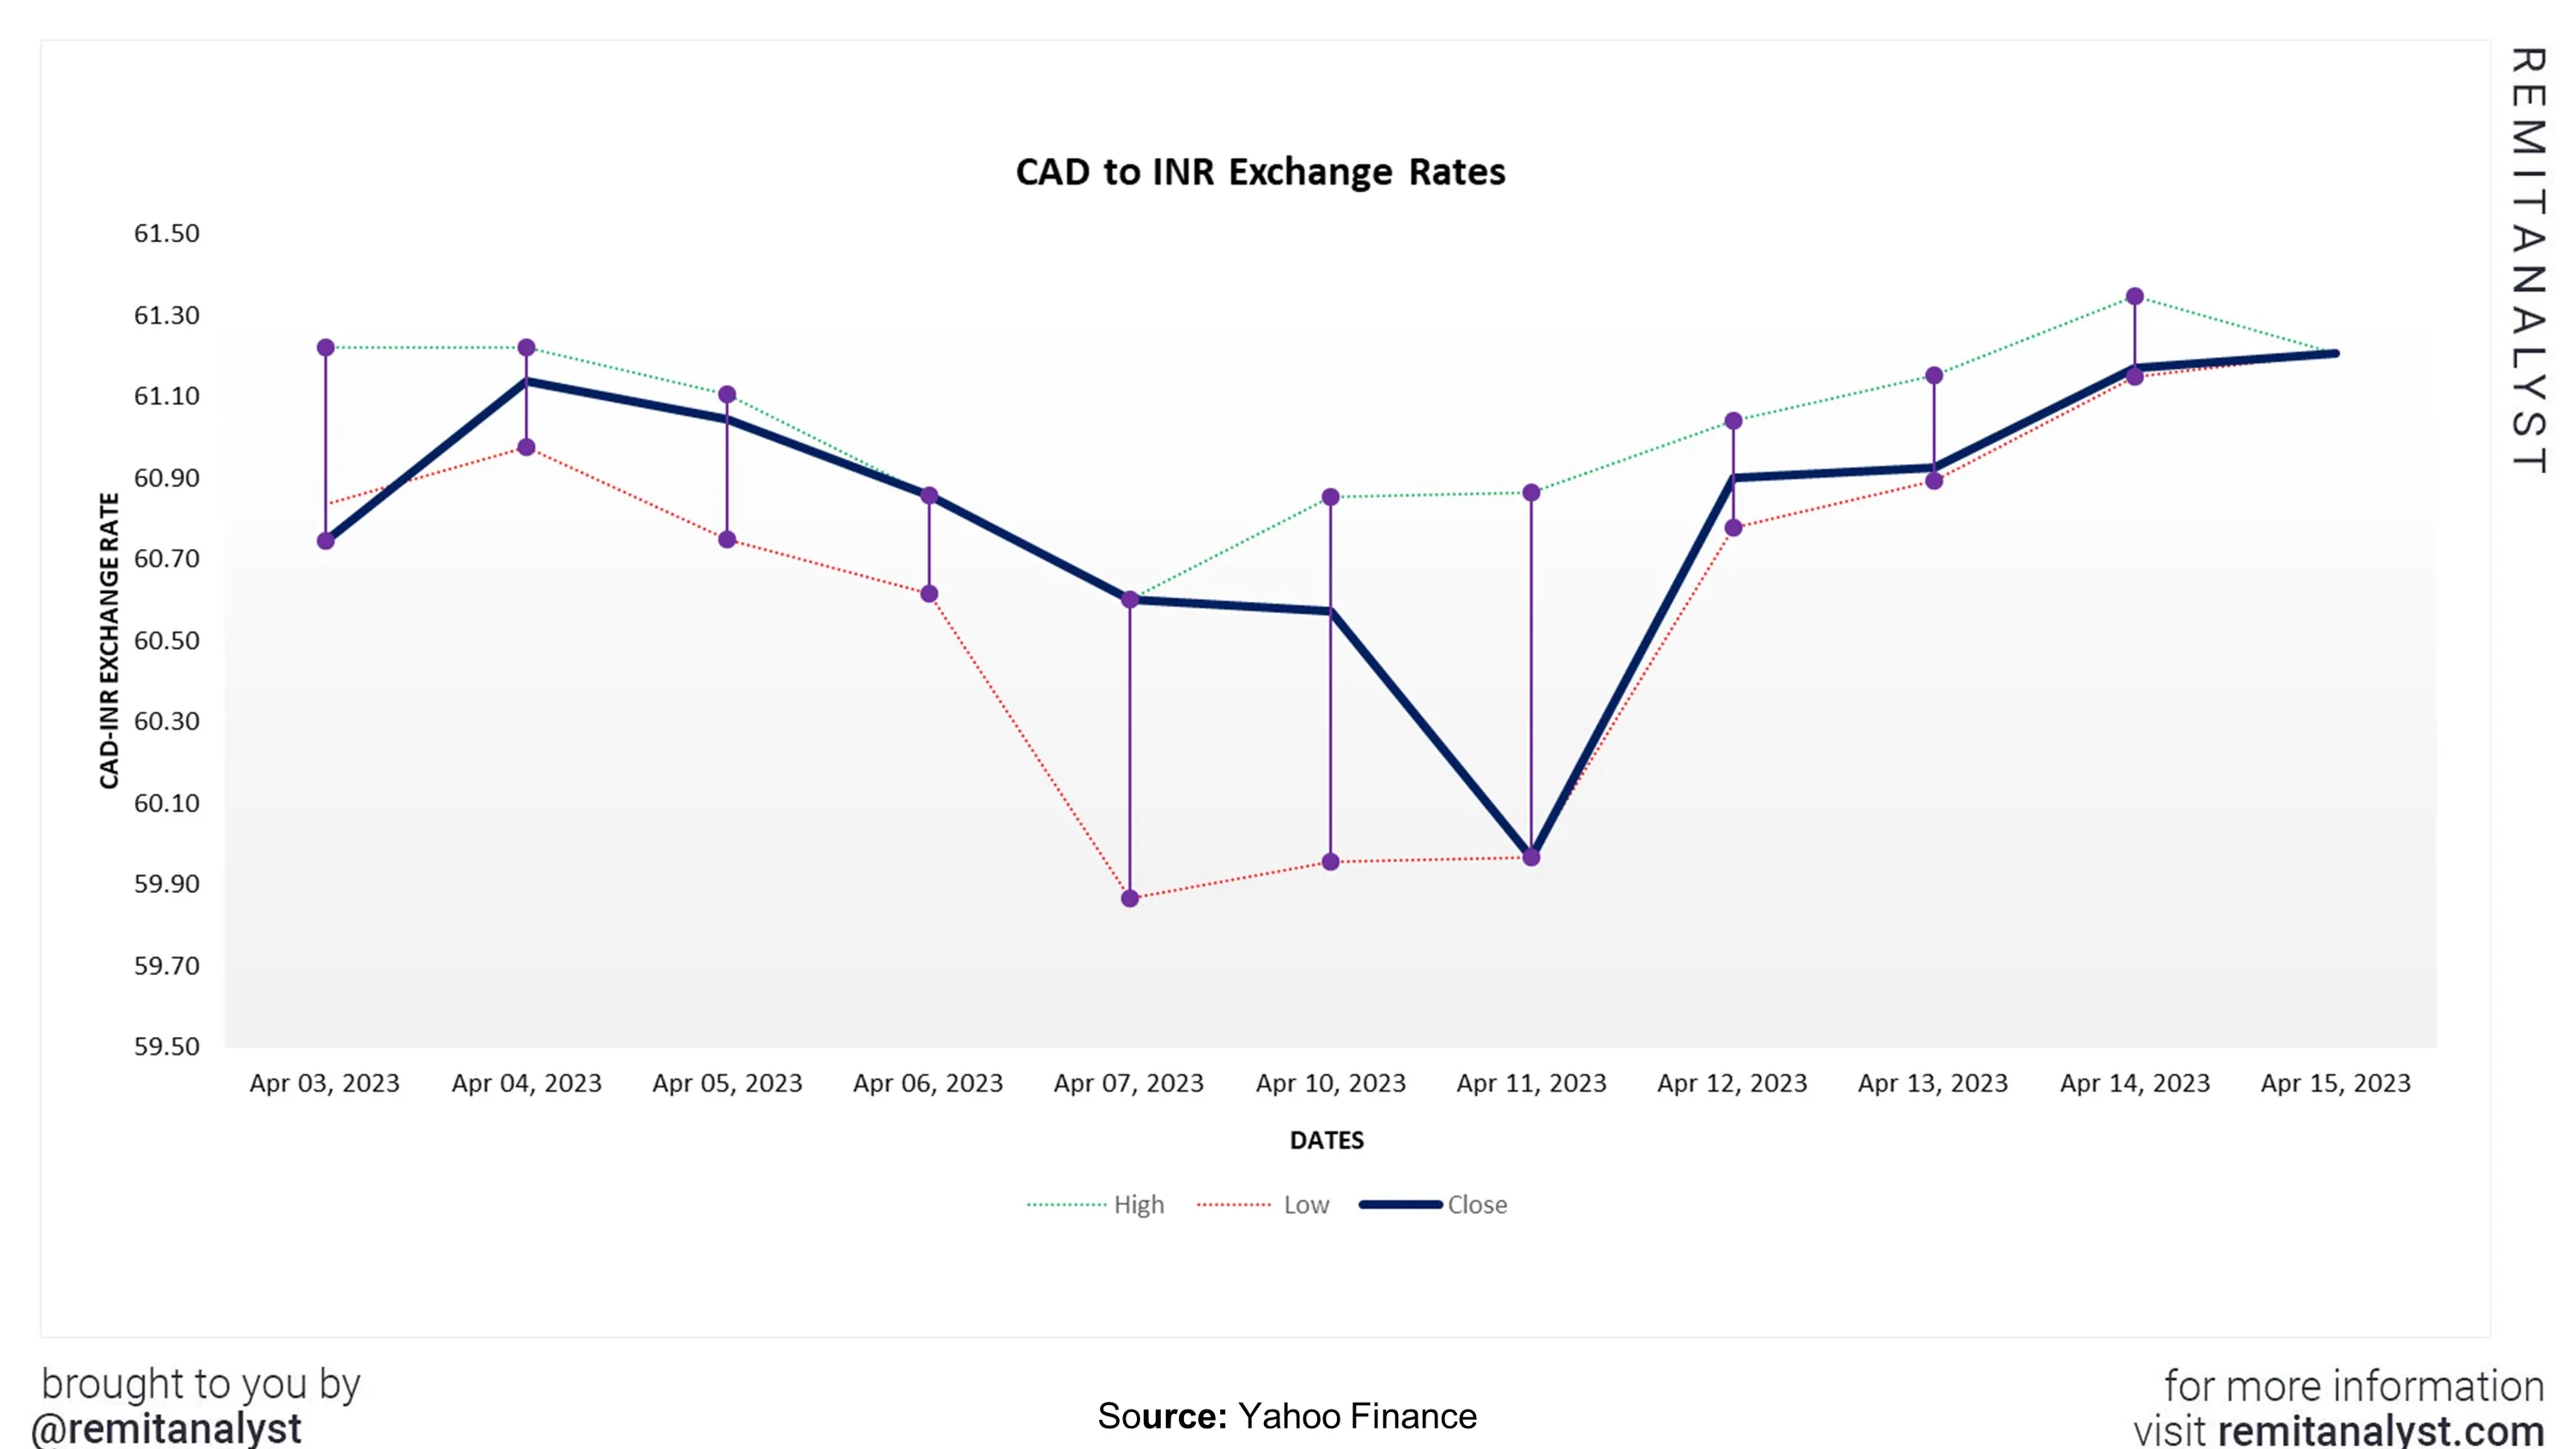 cad-to-inr-exchange-rate-from-3-apr-2023-to-15-apr-2023